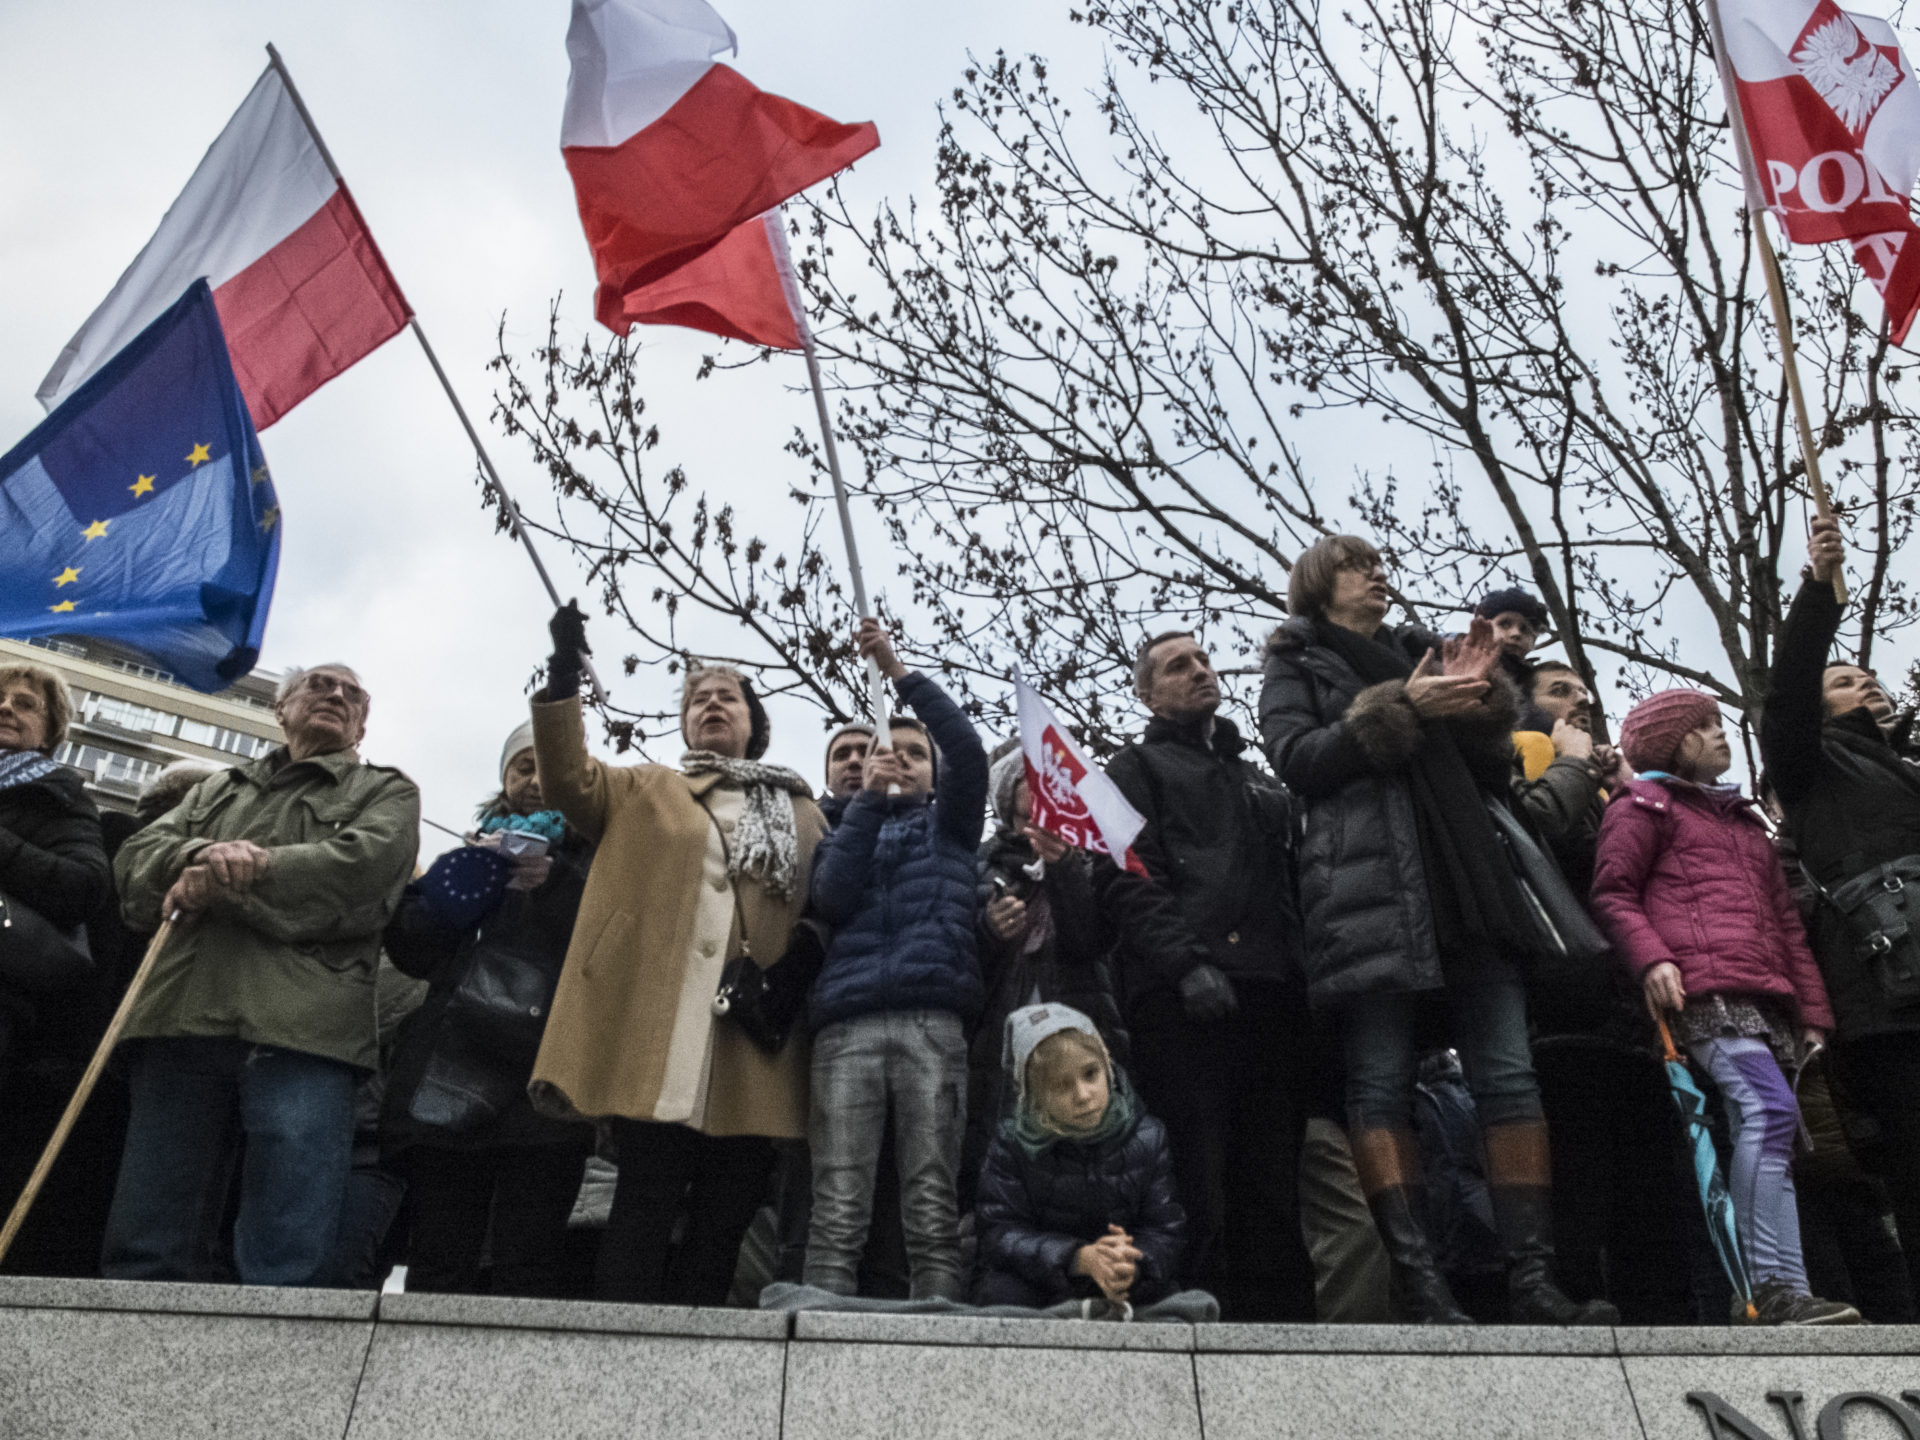 Demonstrations in Poland in 2015 by Committee for the Defense of Freedom.